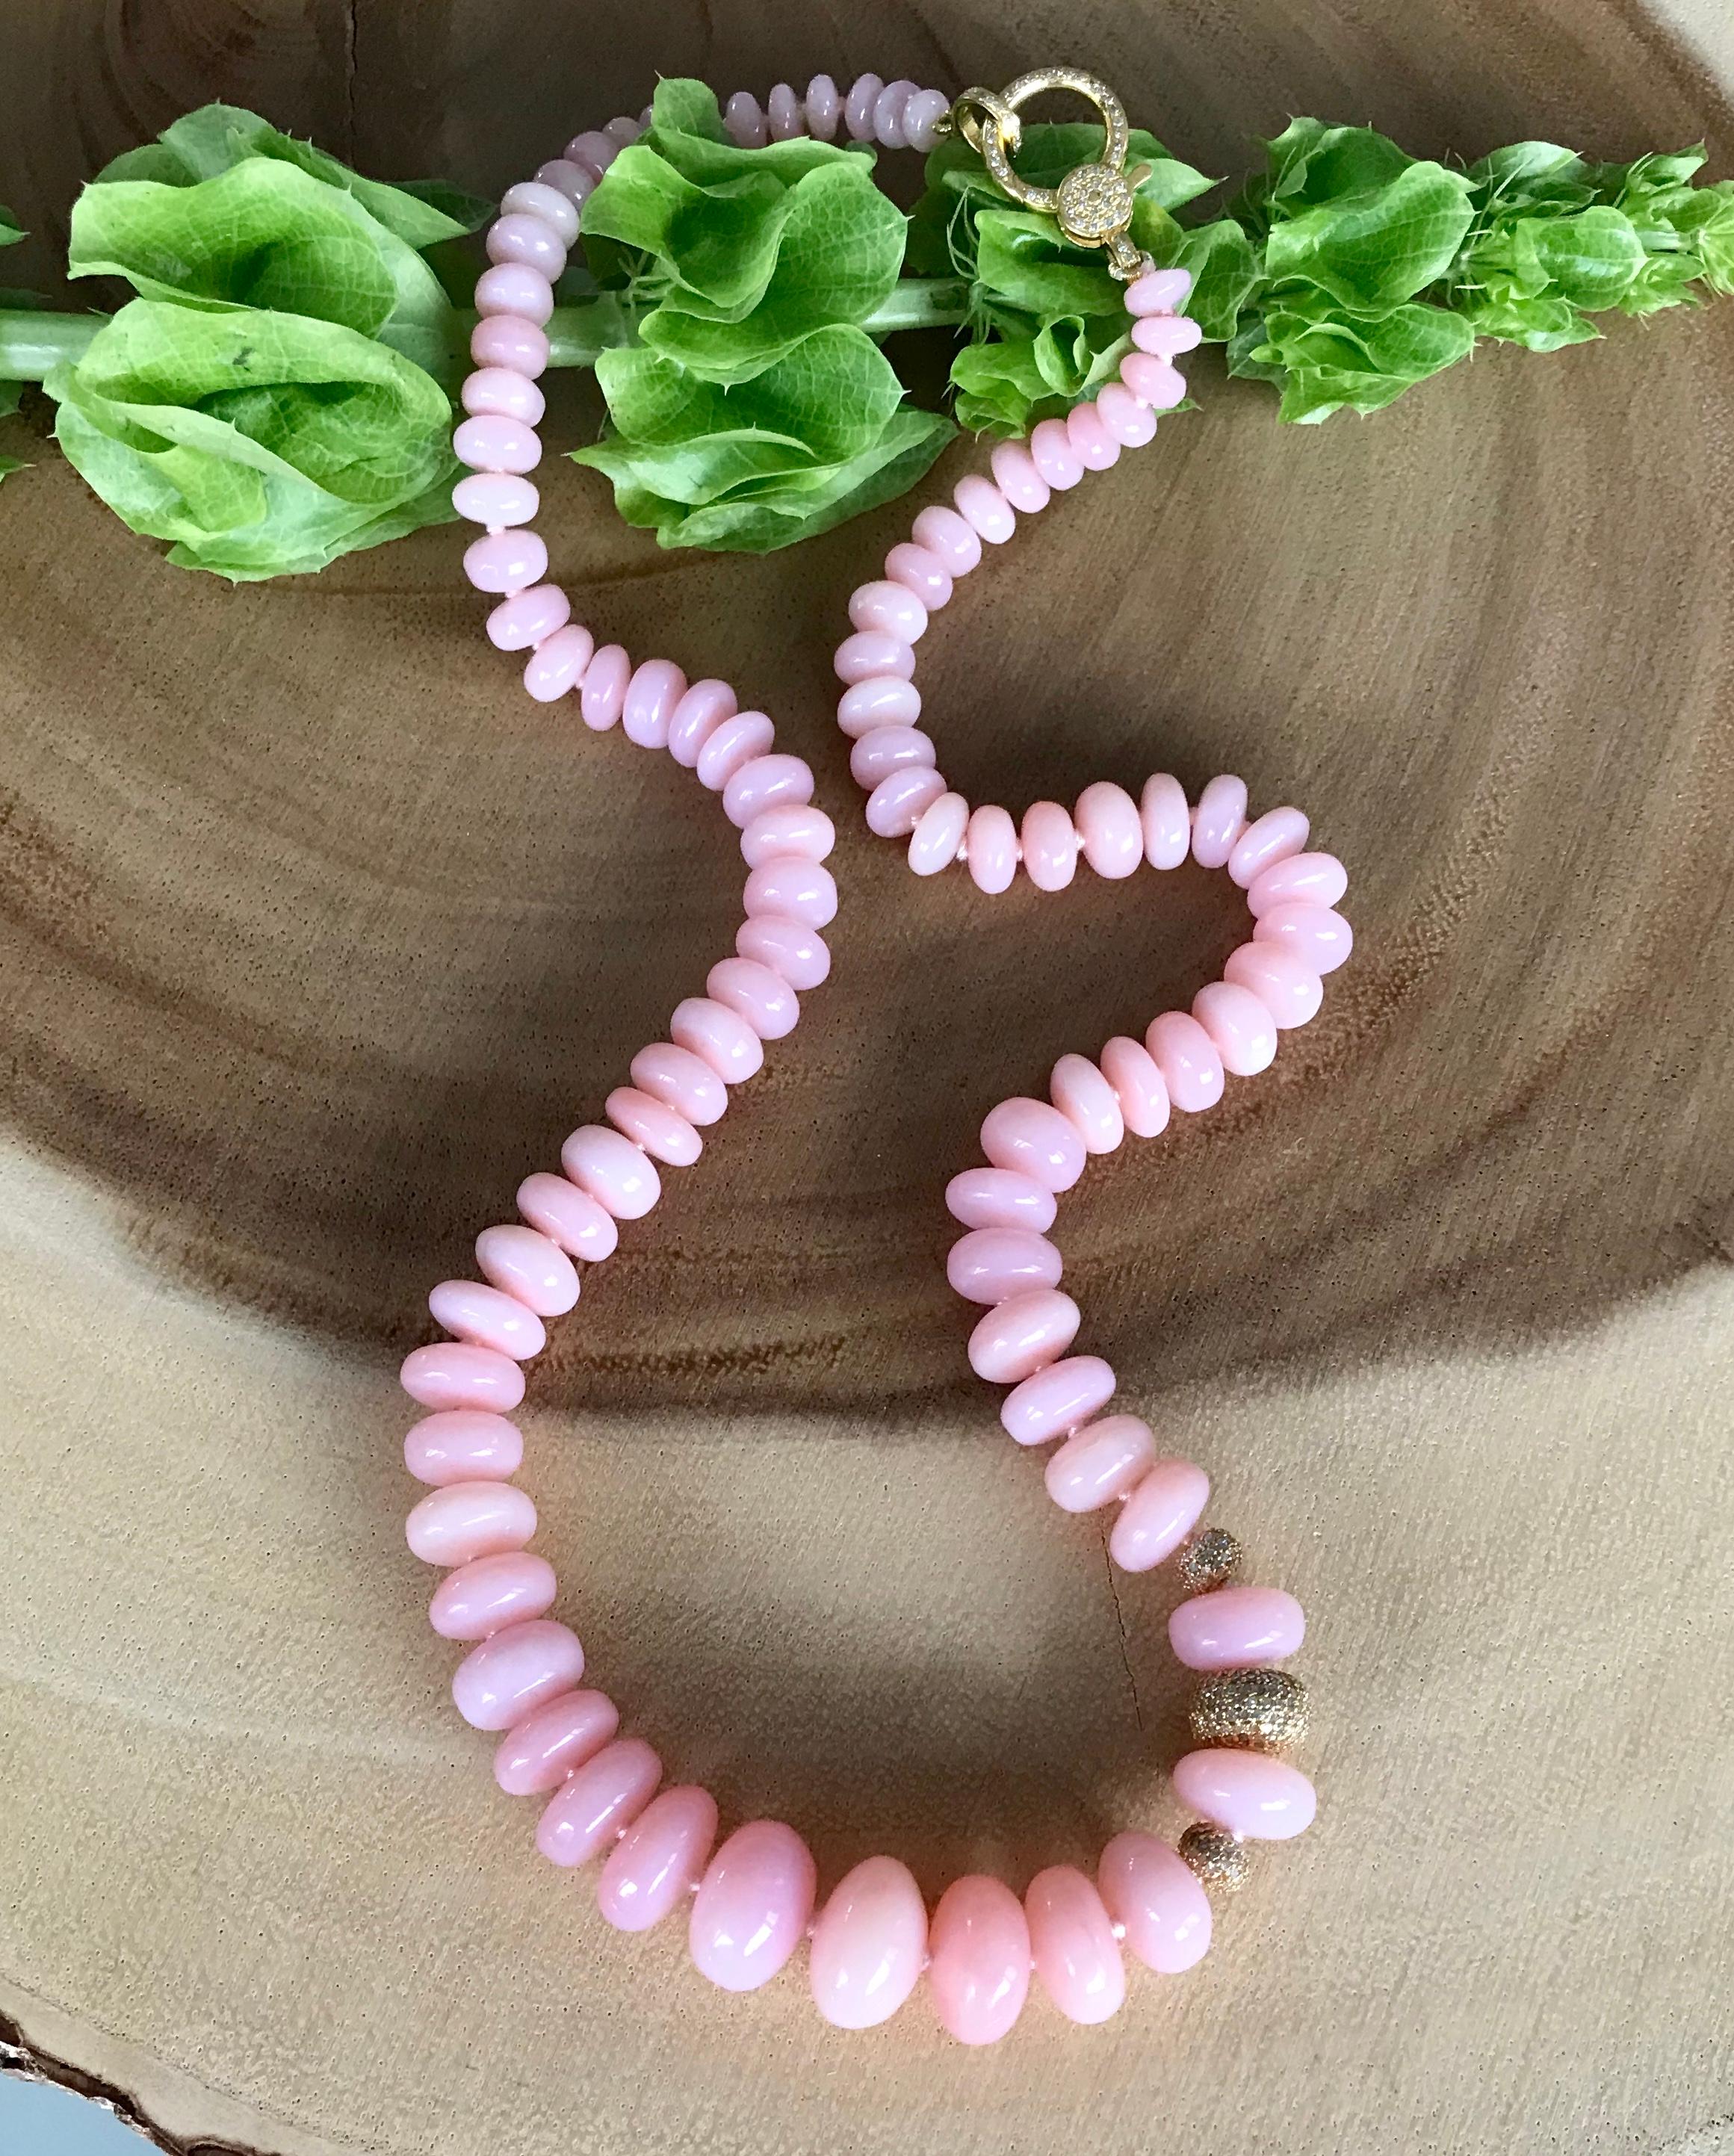 One-of-a-kind smooth pink opal beaded necklace with three diamond beads set in 14 karat yellow gold, with a 14 karat yellow gold and diamond clasp.

This beautiful pink opal beaded necklace with 3 diamond beads and a diamond clasp is a wonderful